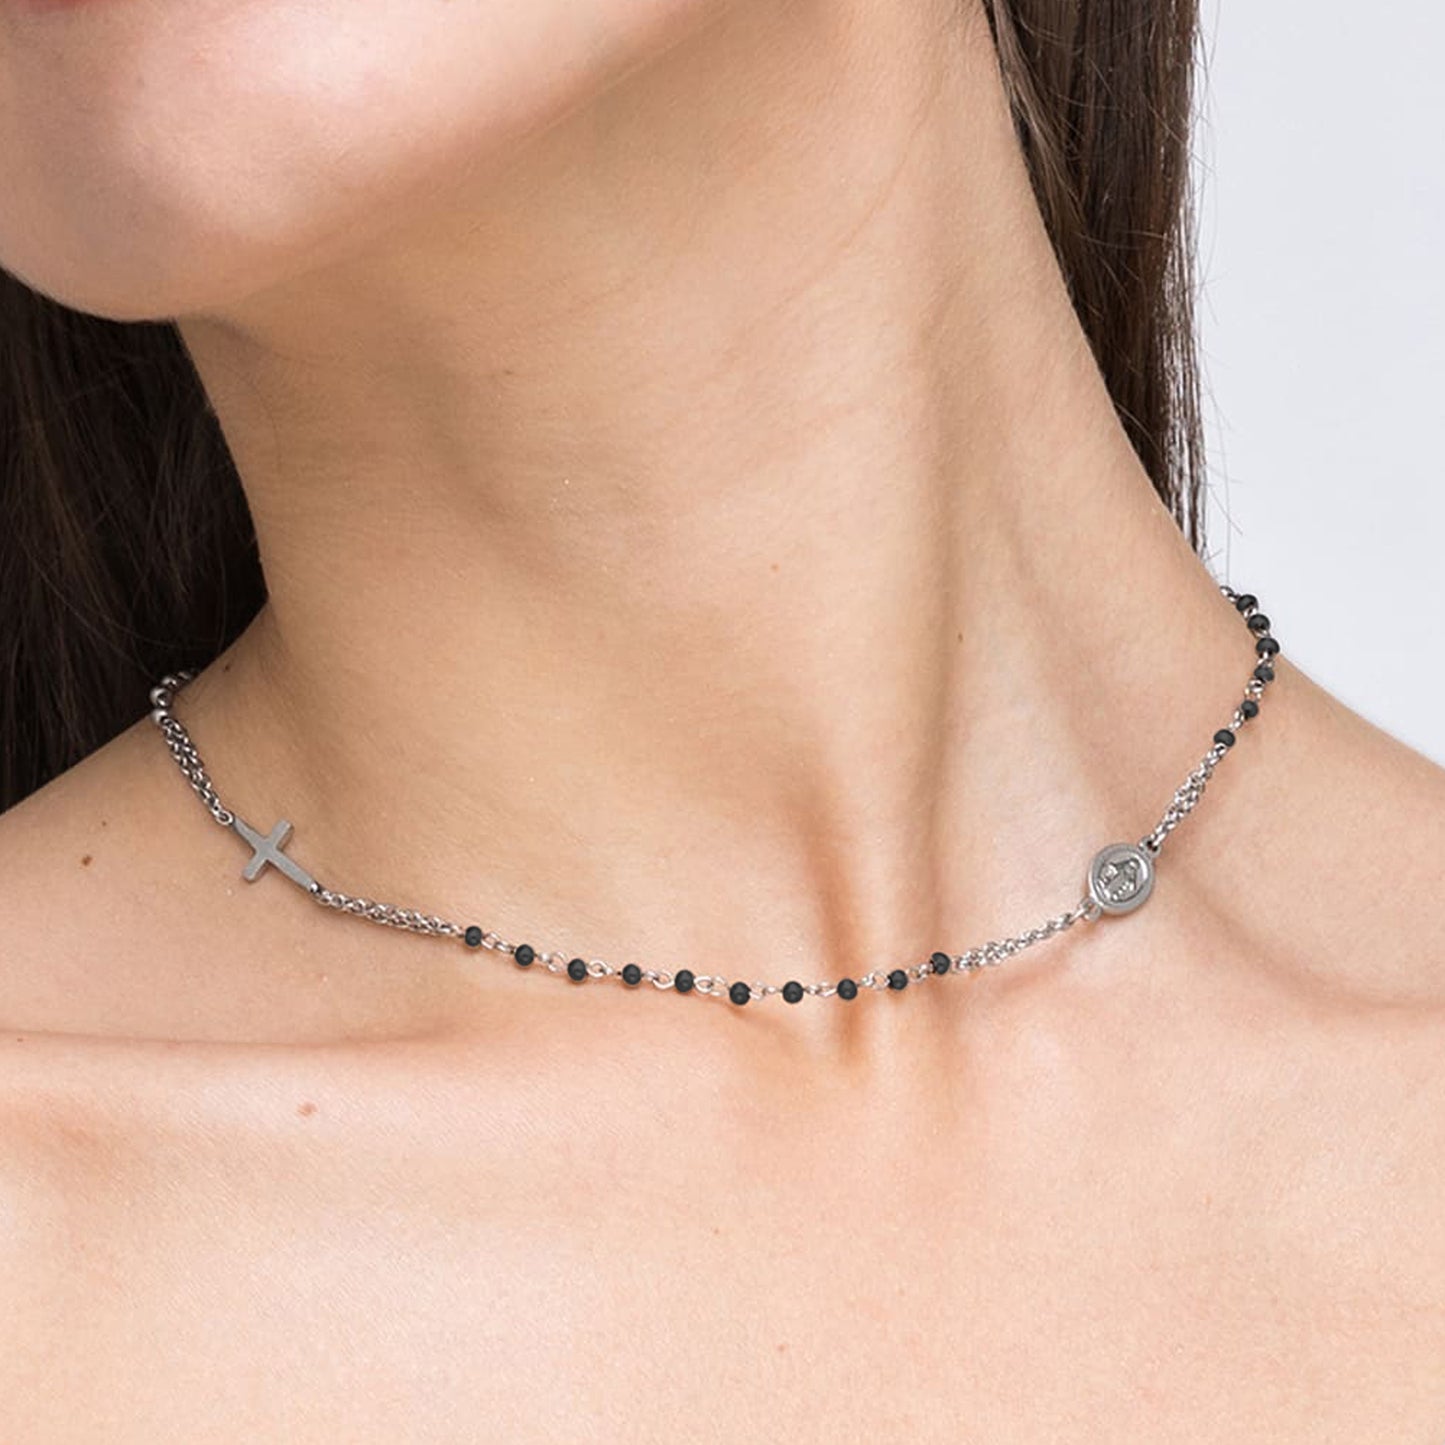 WOMEN'S STEEL ROSARY NECKLACE WITH BLACK CRYSTALS